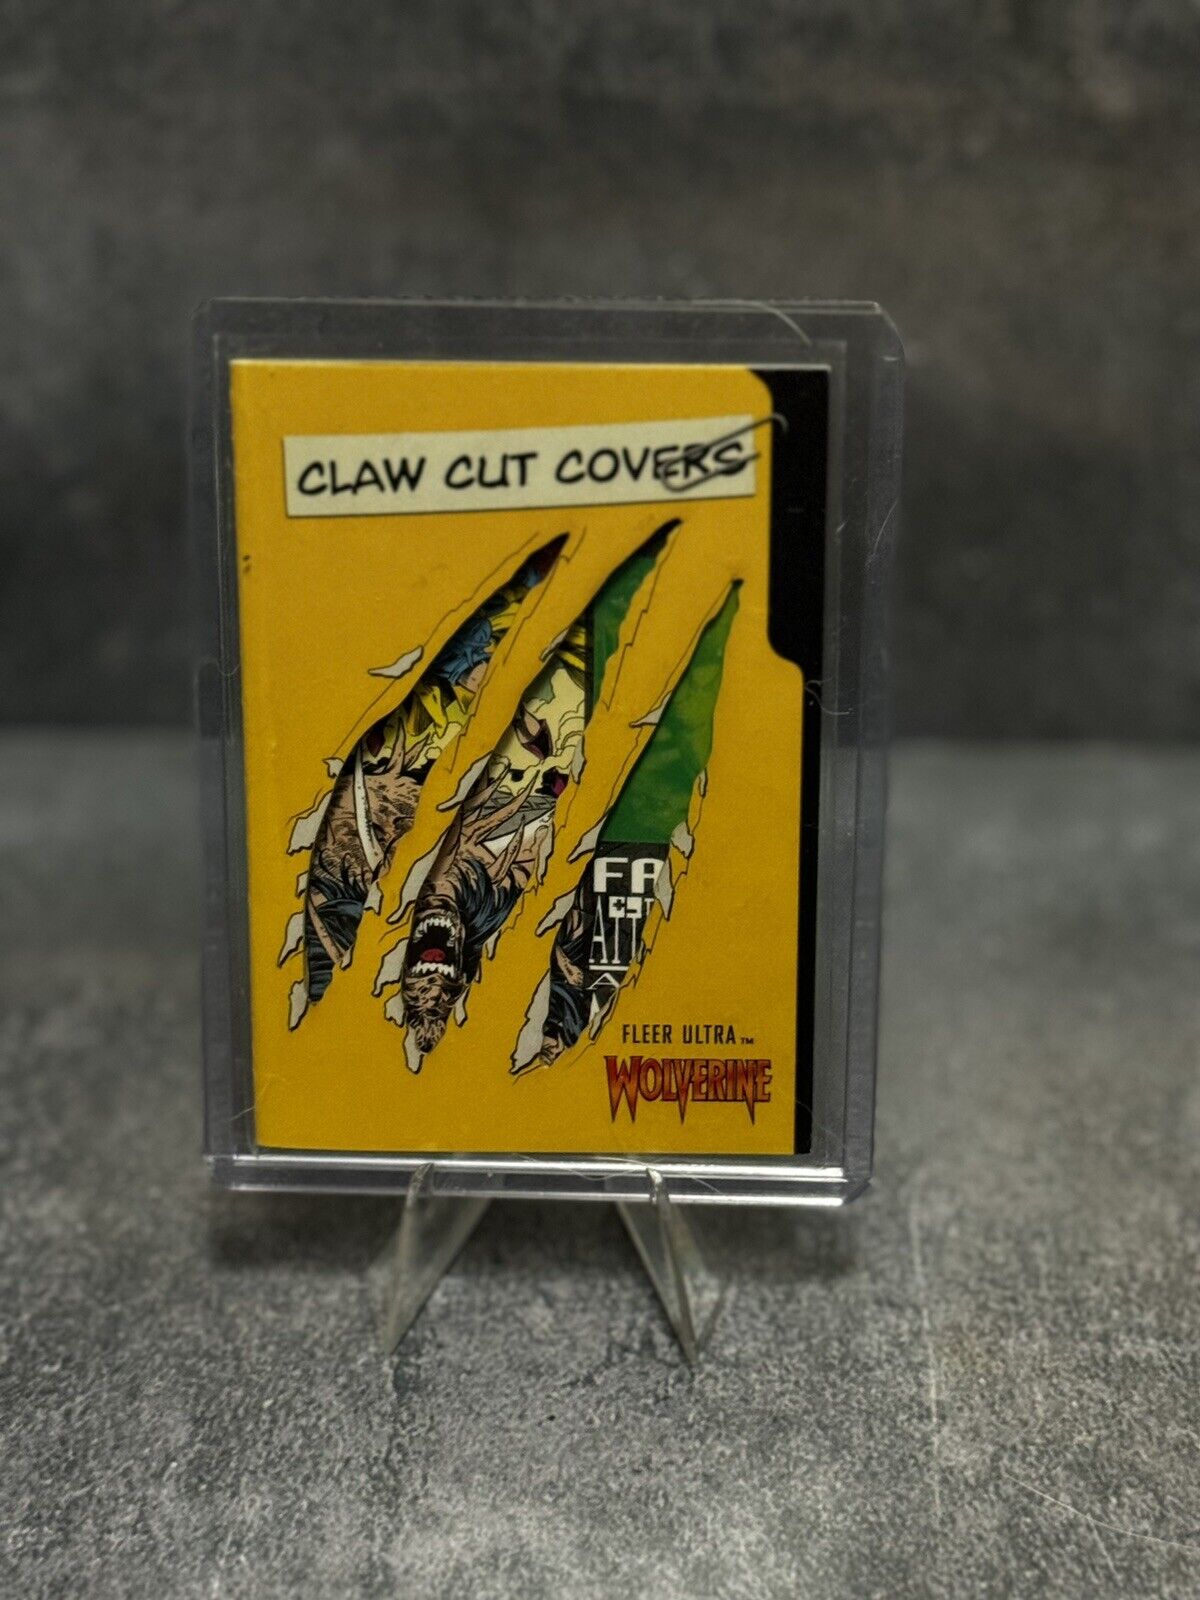 2023 UPPER DECK FLEER ULTRA WOLVERINE CLAW CUT COVERS CARD # CCC-28 - /50 1988